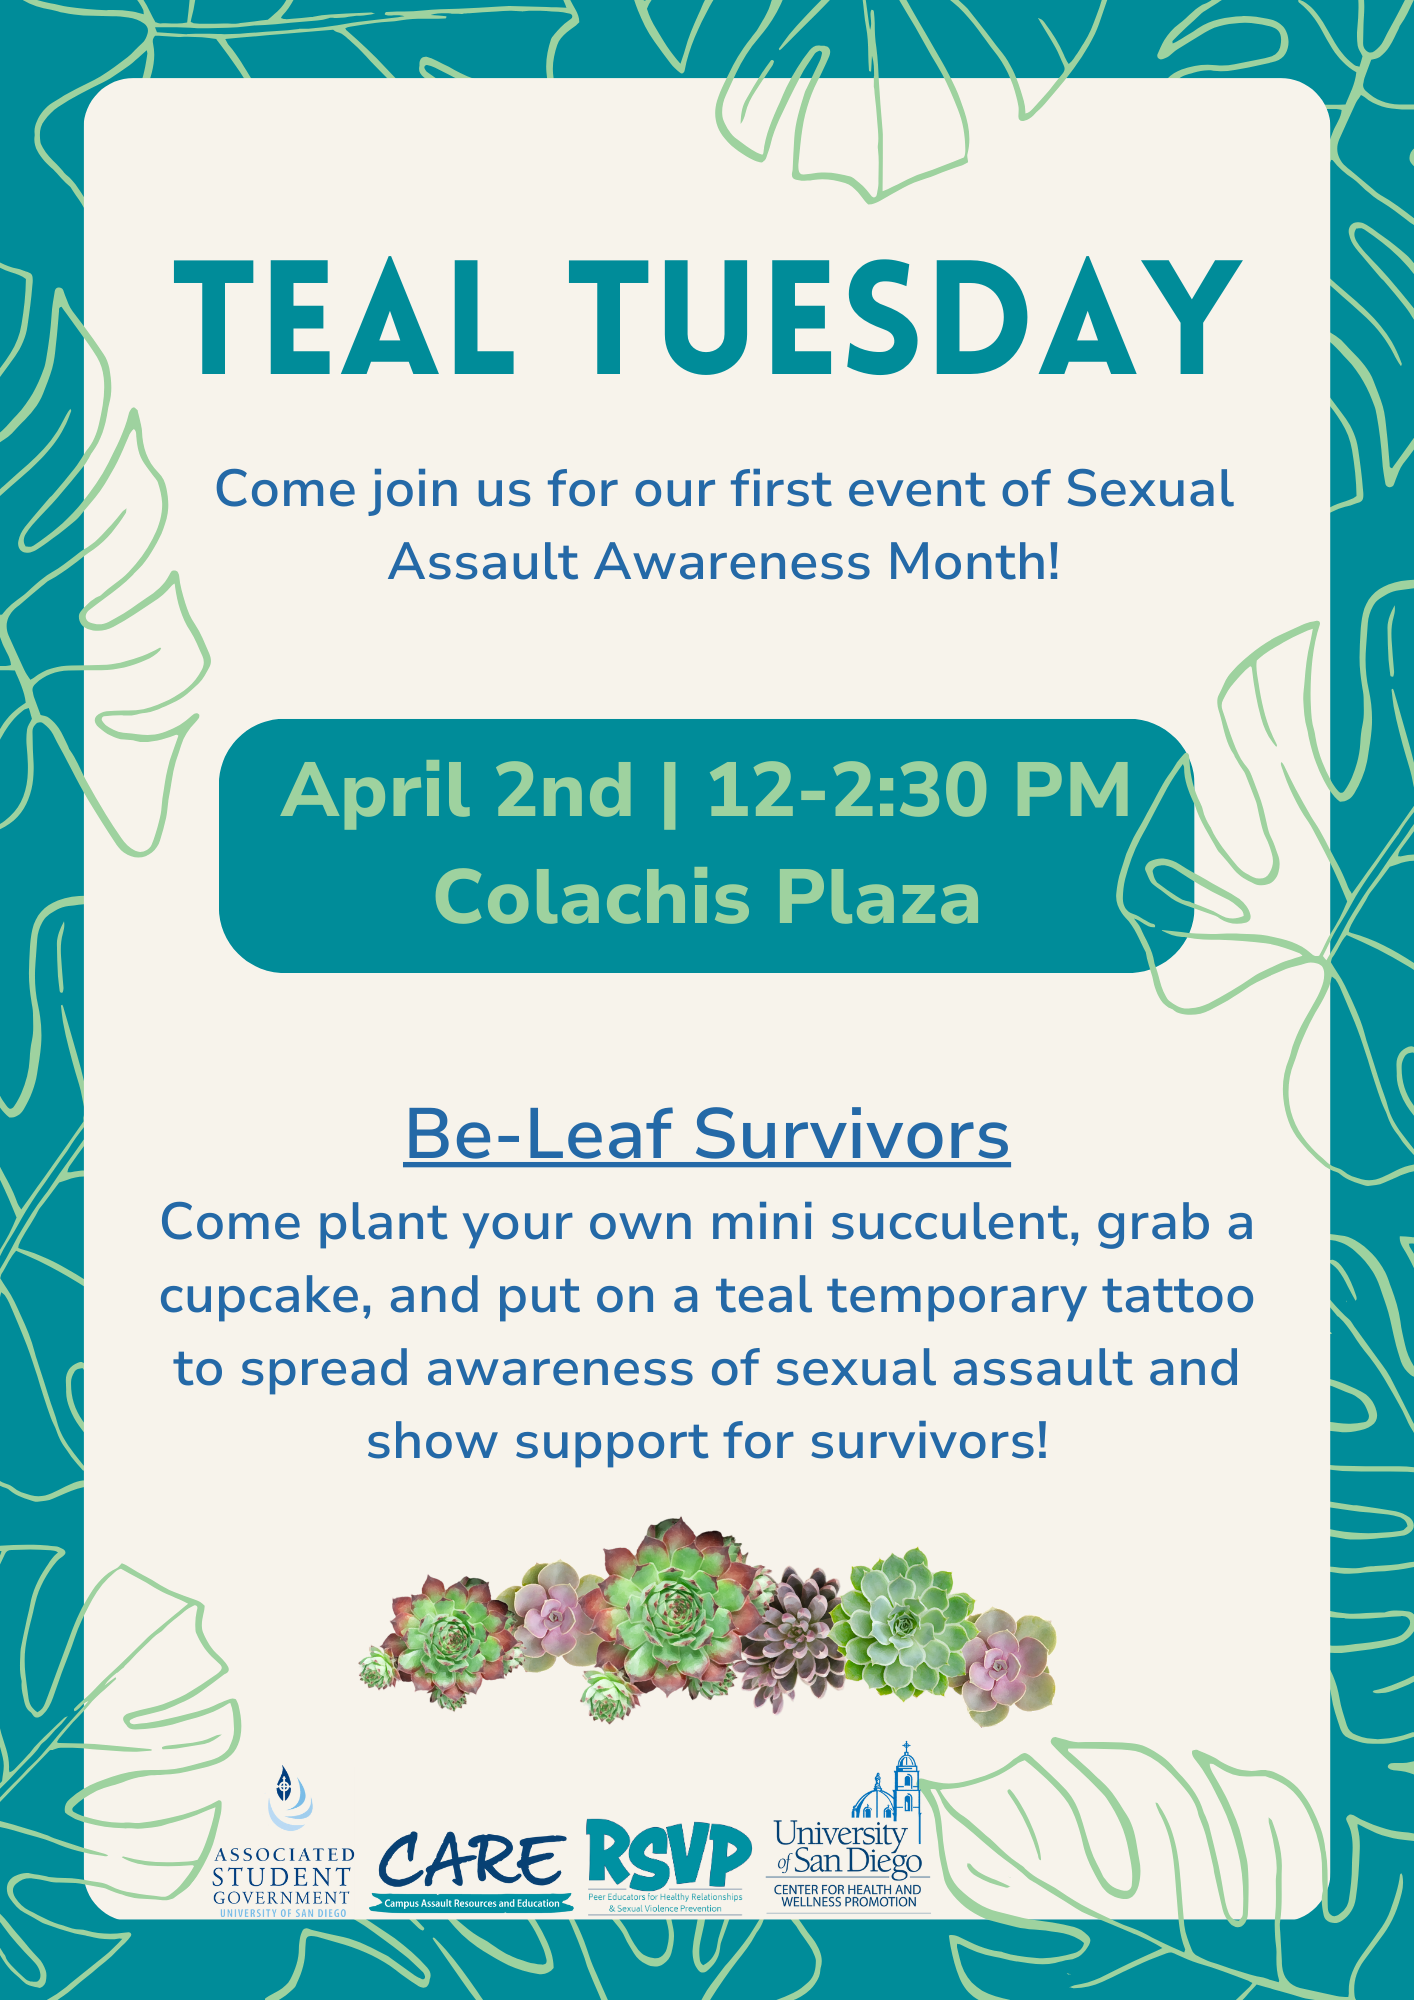 On a cream and teal background, multicolored text reads: "Teal Tuesday" ; "Come join us for our first event of Sexual Assault Awareness Month!" ; "April 2nd | 12-2:30 PM Colachis Plaza" ; "Be-Leaf Survivors, Come plant your own mini succulent, grab a cupcake, and put on a teal temporary tattoo to spread awareness of sexual assault and show support for survivors!" At the bottom of the page, a colorful succulent image lies above ASG, CARE, RSVP, CHWP logos.